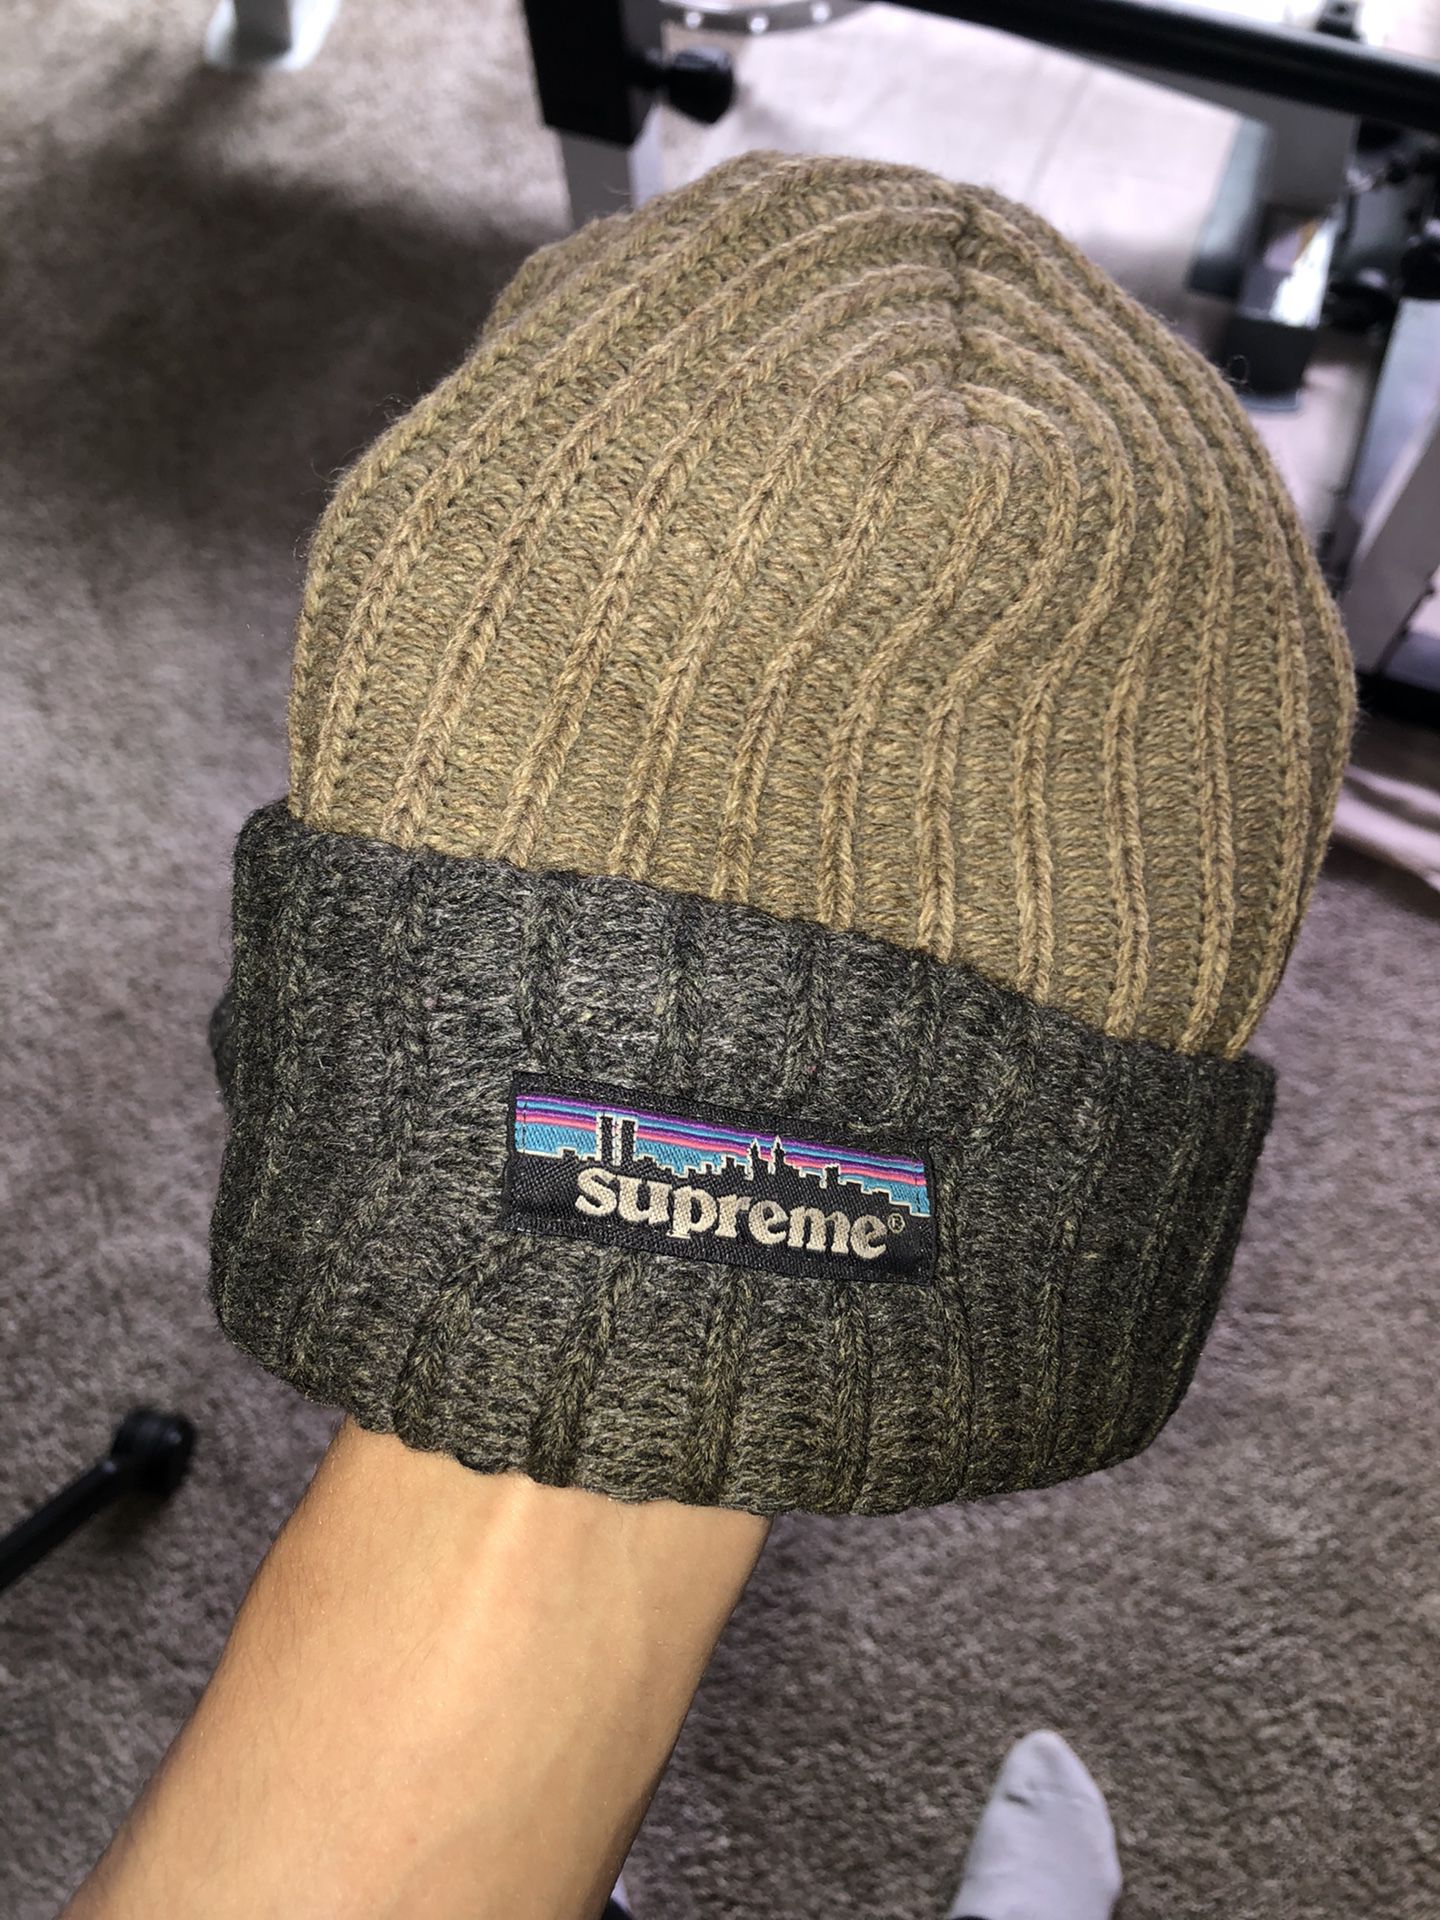 Supreme X Patagonia Beanie Hat for Sale in Salinas, CA - OfferUp